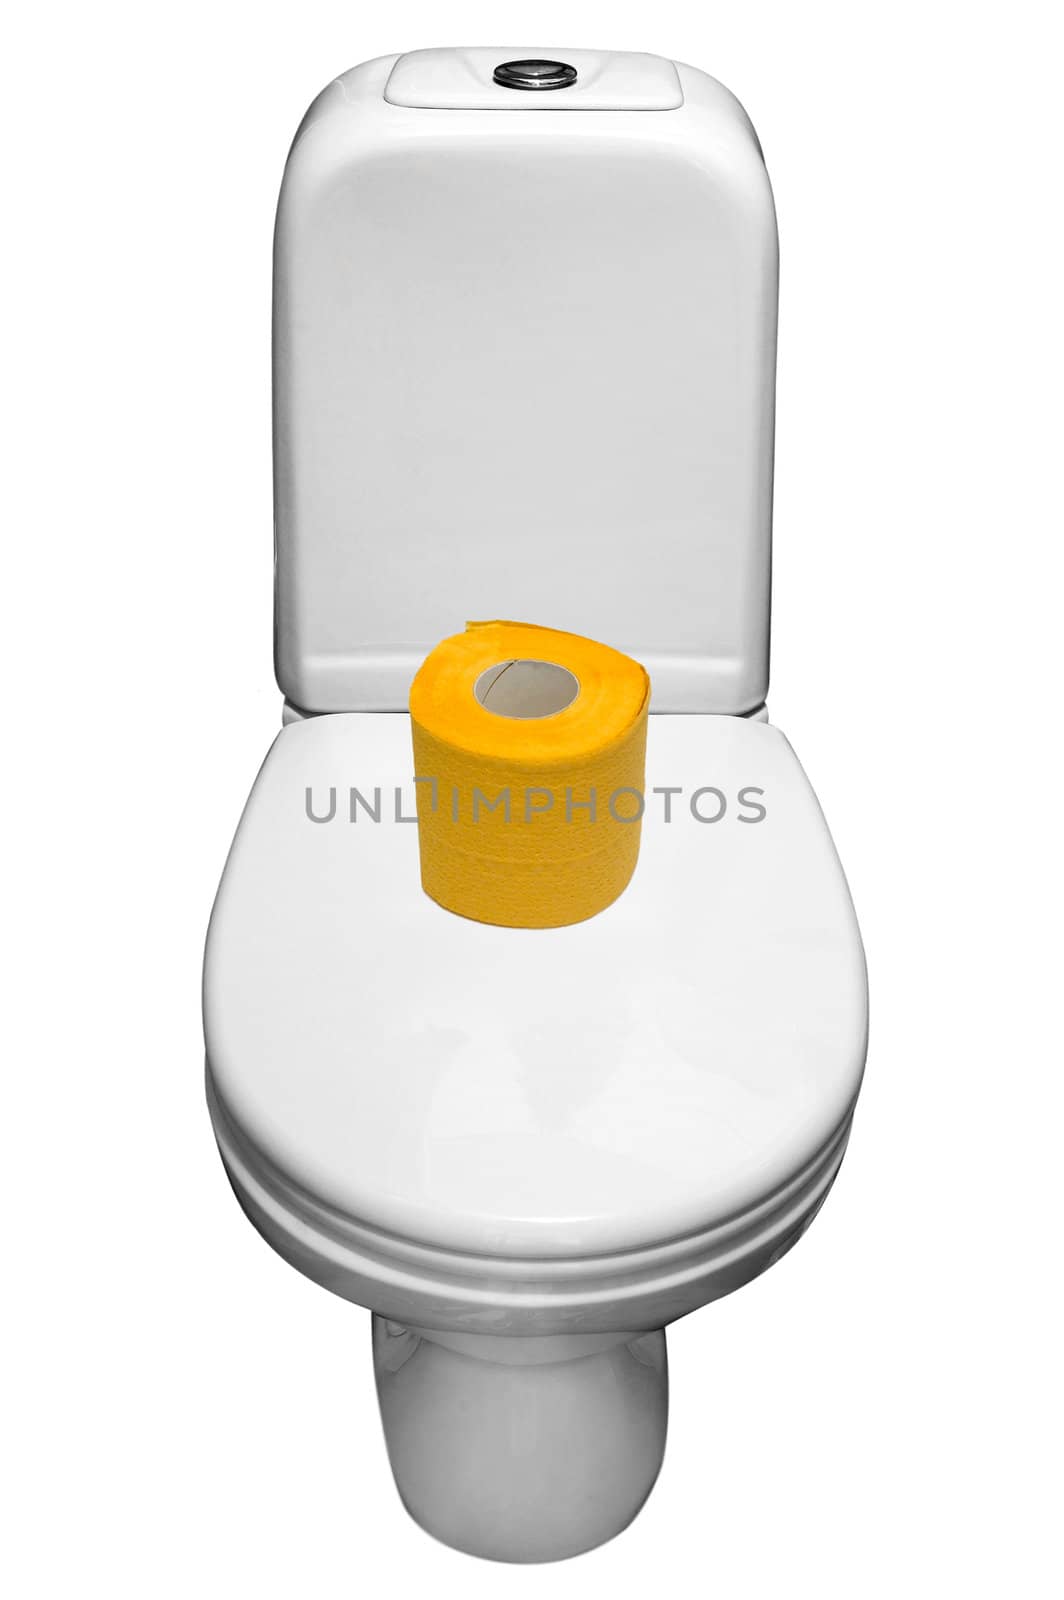 White porcelain lavatory pan  and toilet-paper on isolated background.